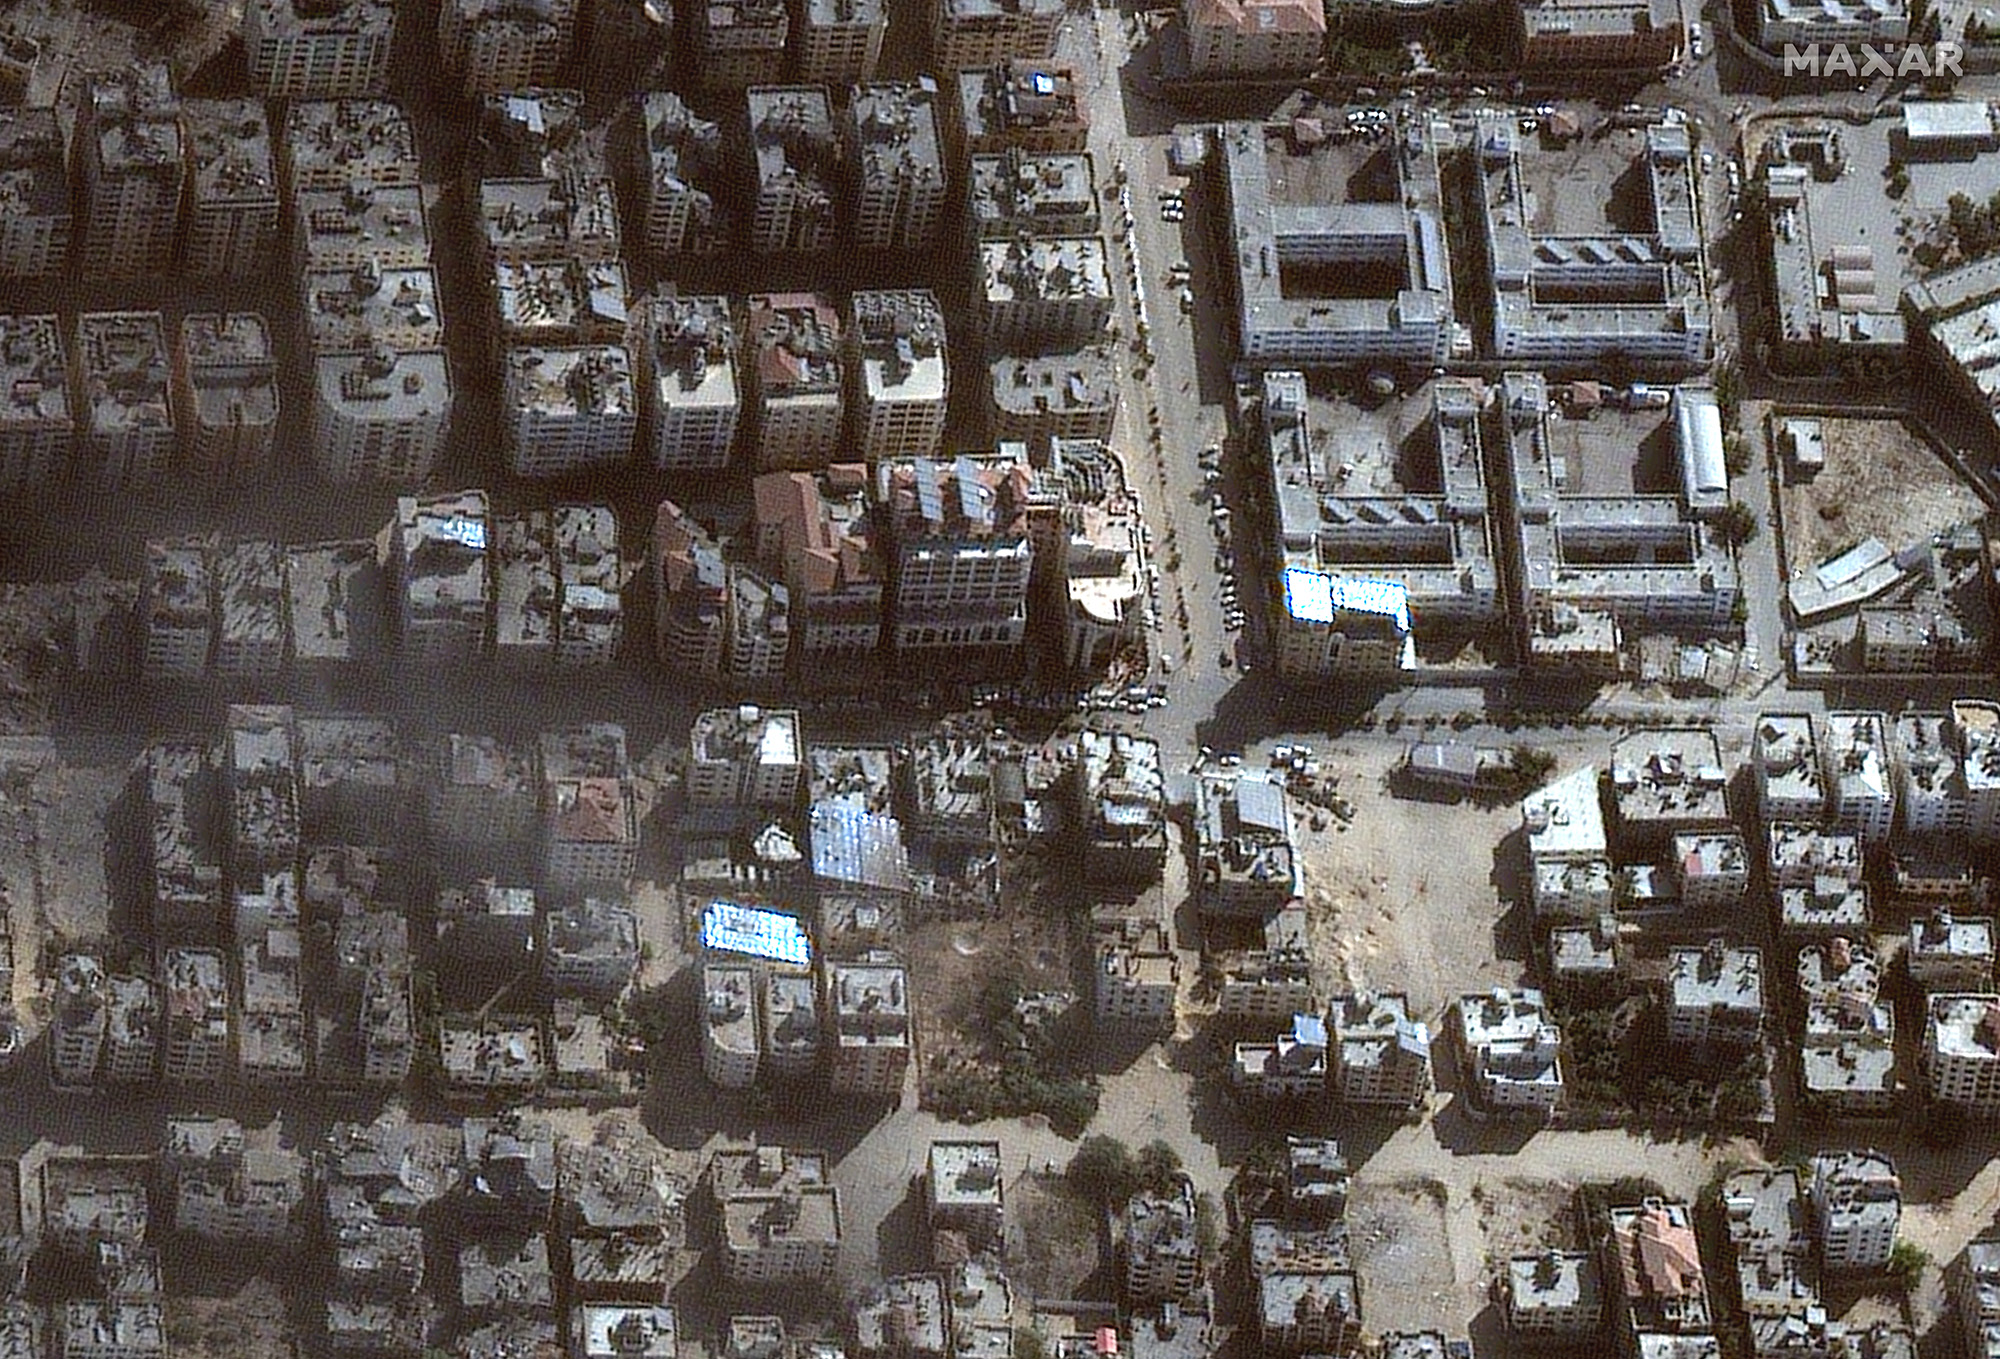 This satellite image shows Al-Quds hospital, center, and the surrounding area in Gaza, on November 11.